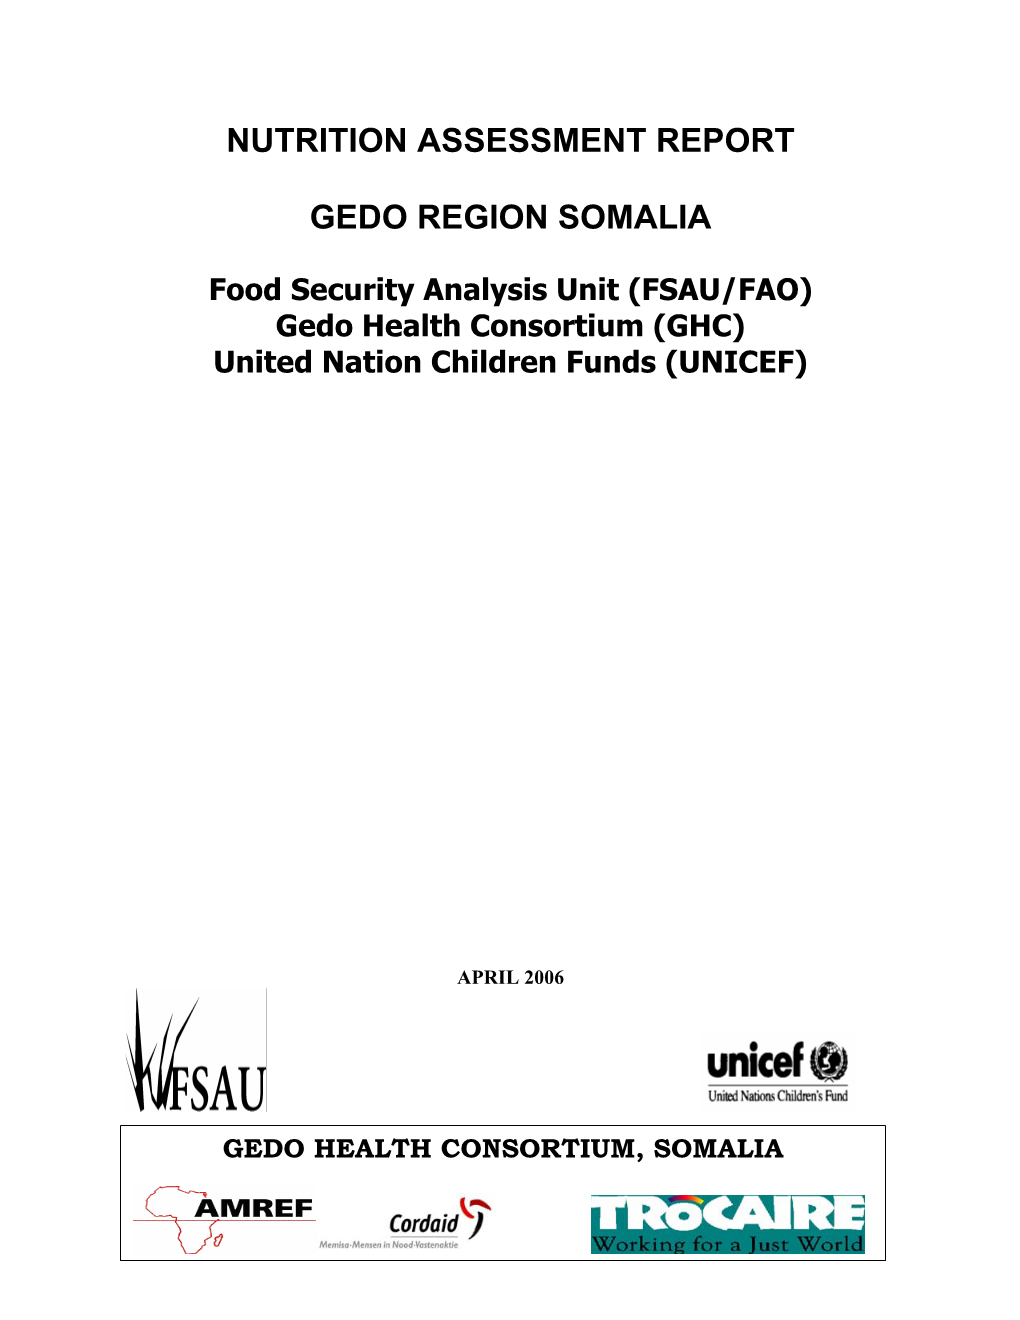 Gedo Nutrition Assessment Report – March 2006- FAO/FSAU, GHC, UNICEF & Partners